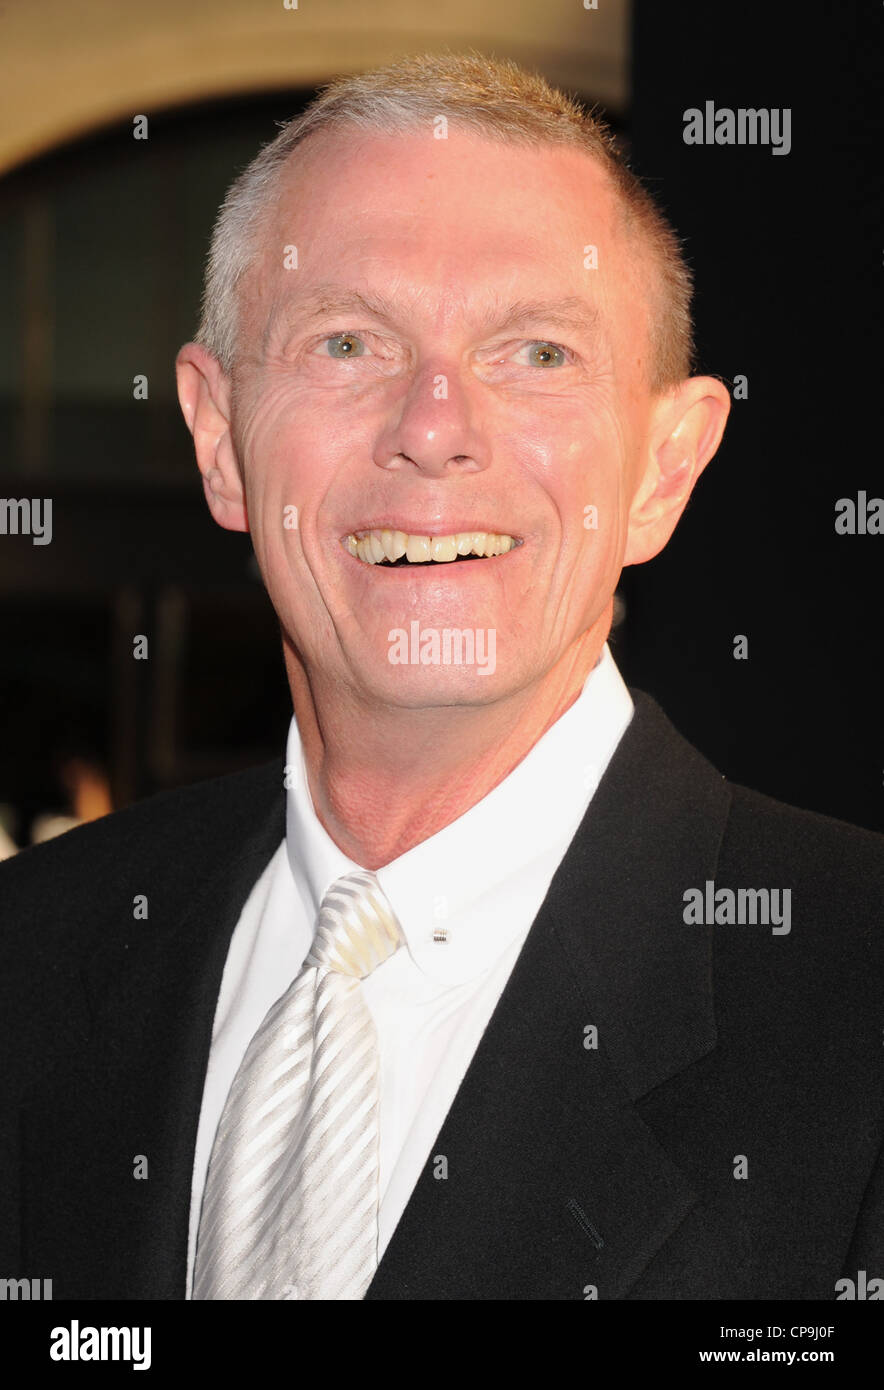 RICHARD CARPENTER  US singer in May 2012. Once part of The Carpenters with sister Karen. Photo Jeffrey Mayer Stock Photo